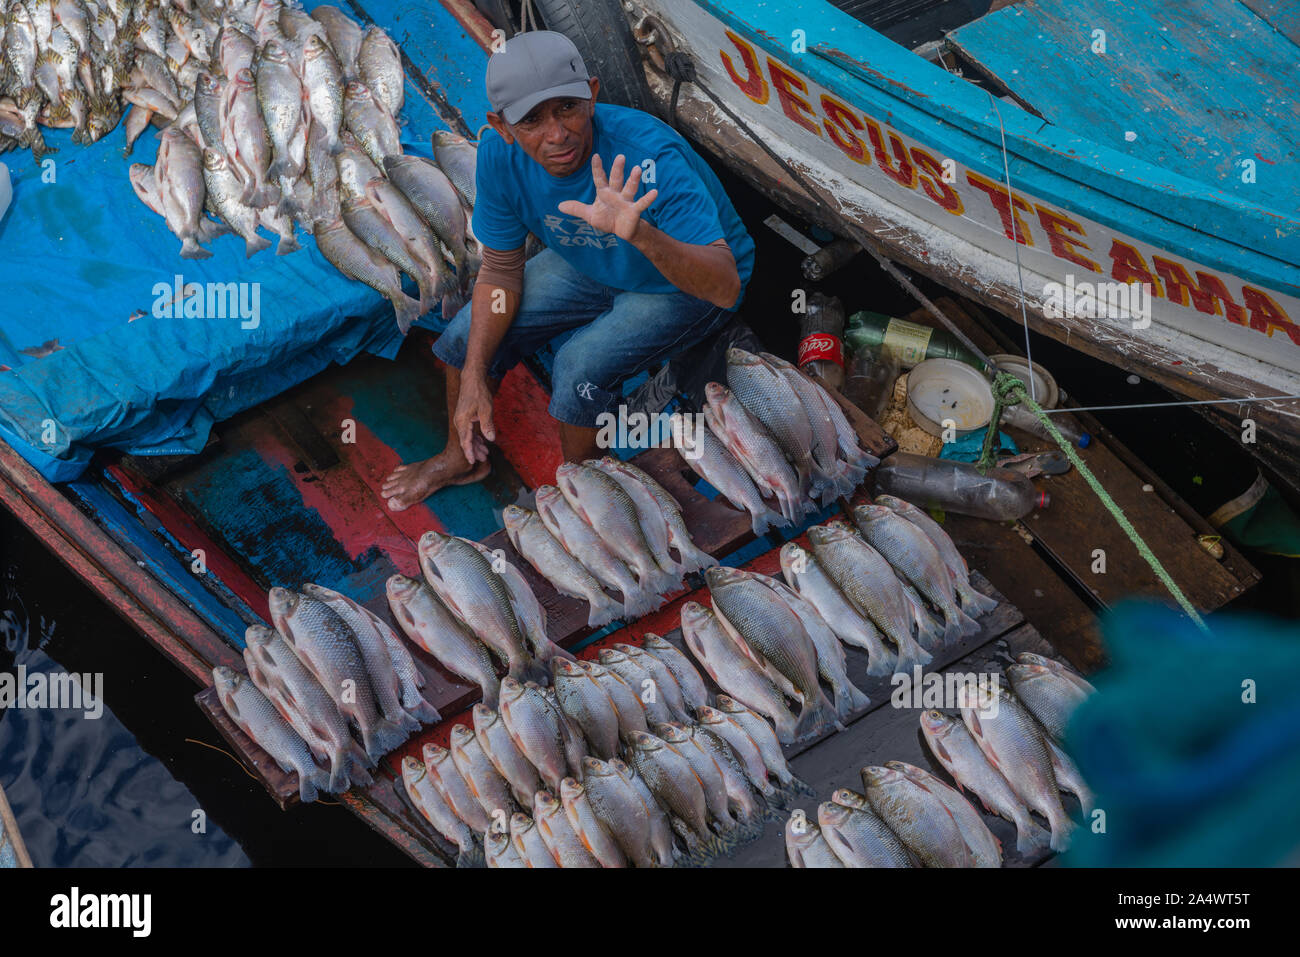 The fishing habor in Porto Flutante or Floating Habour, open fishing boats with owners selling fresh fish, Manaus, The Amazon, Brazil, Latin America Stock Photo